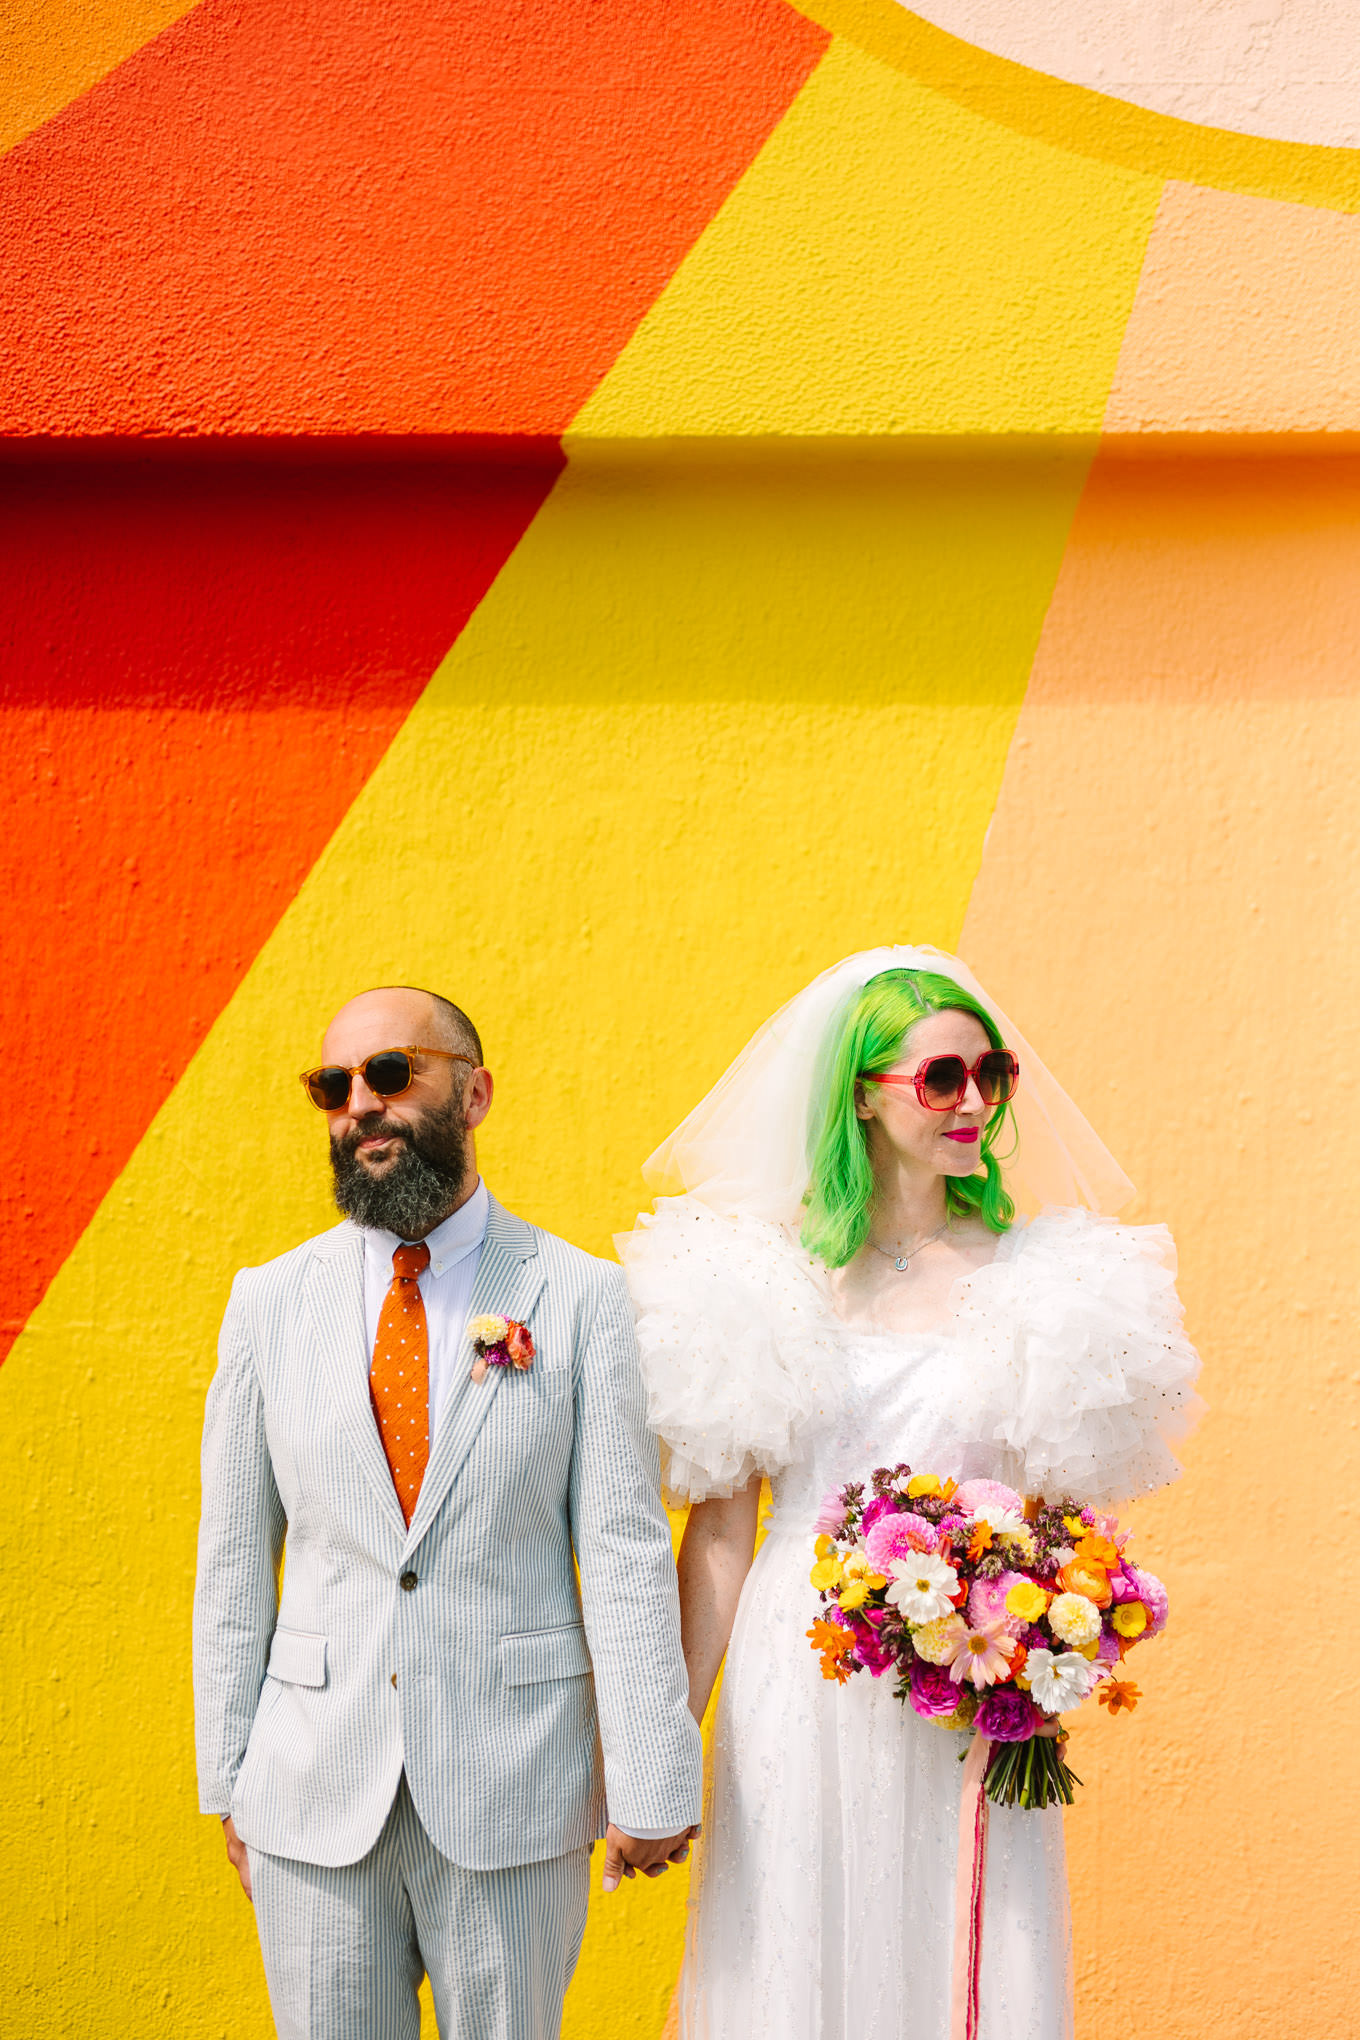 Bob Baker Marionette Elopement | Wedding and elopement photography roundup | Los Angeles and Palm Springs  photographer | #losangeleswedding #palmspringswedding #elopementphotographer

Source: Mary Costa Photography | Los Angeles